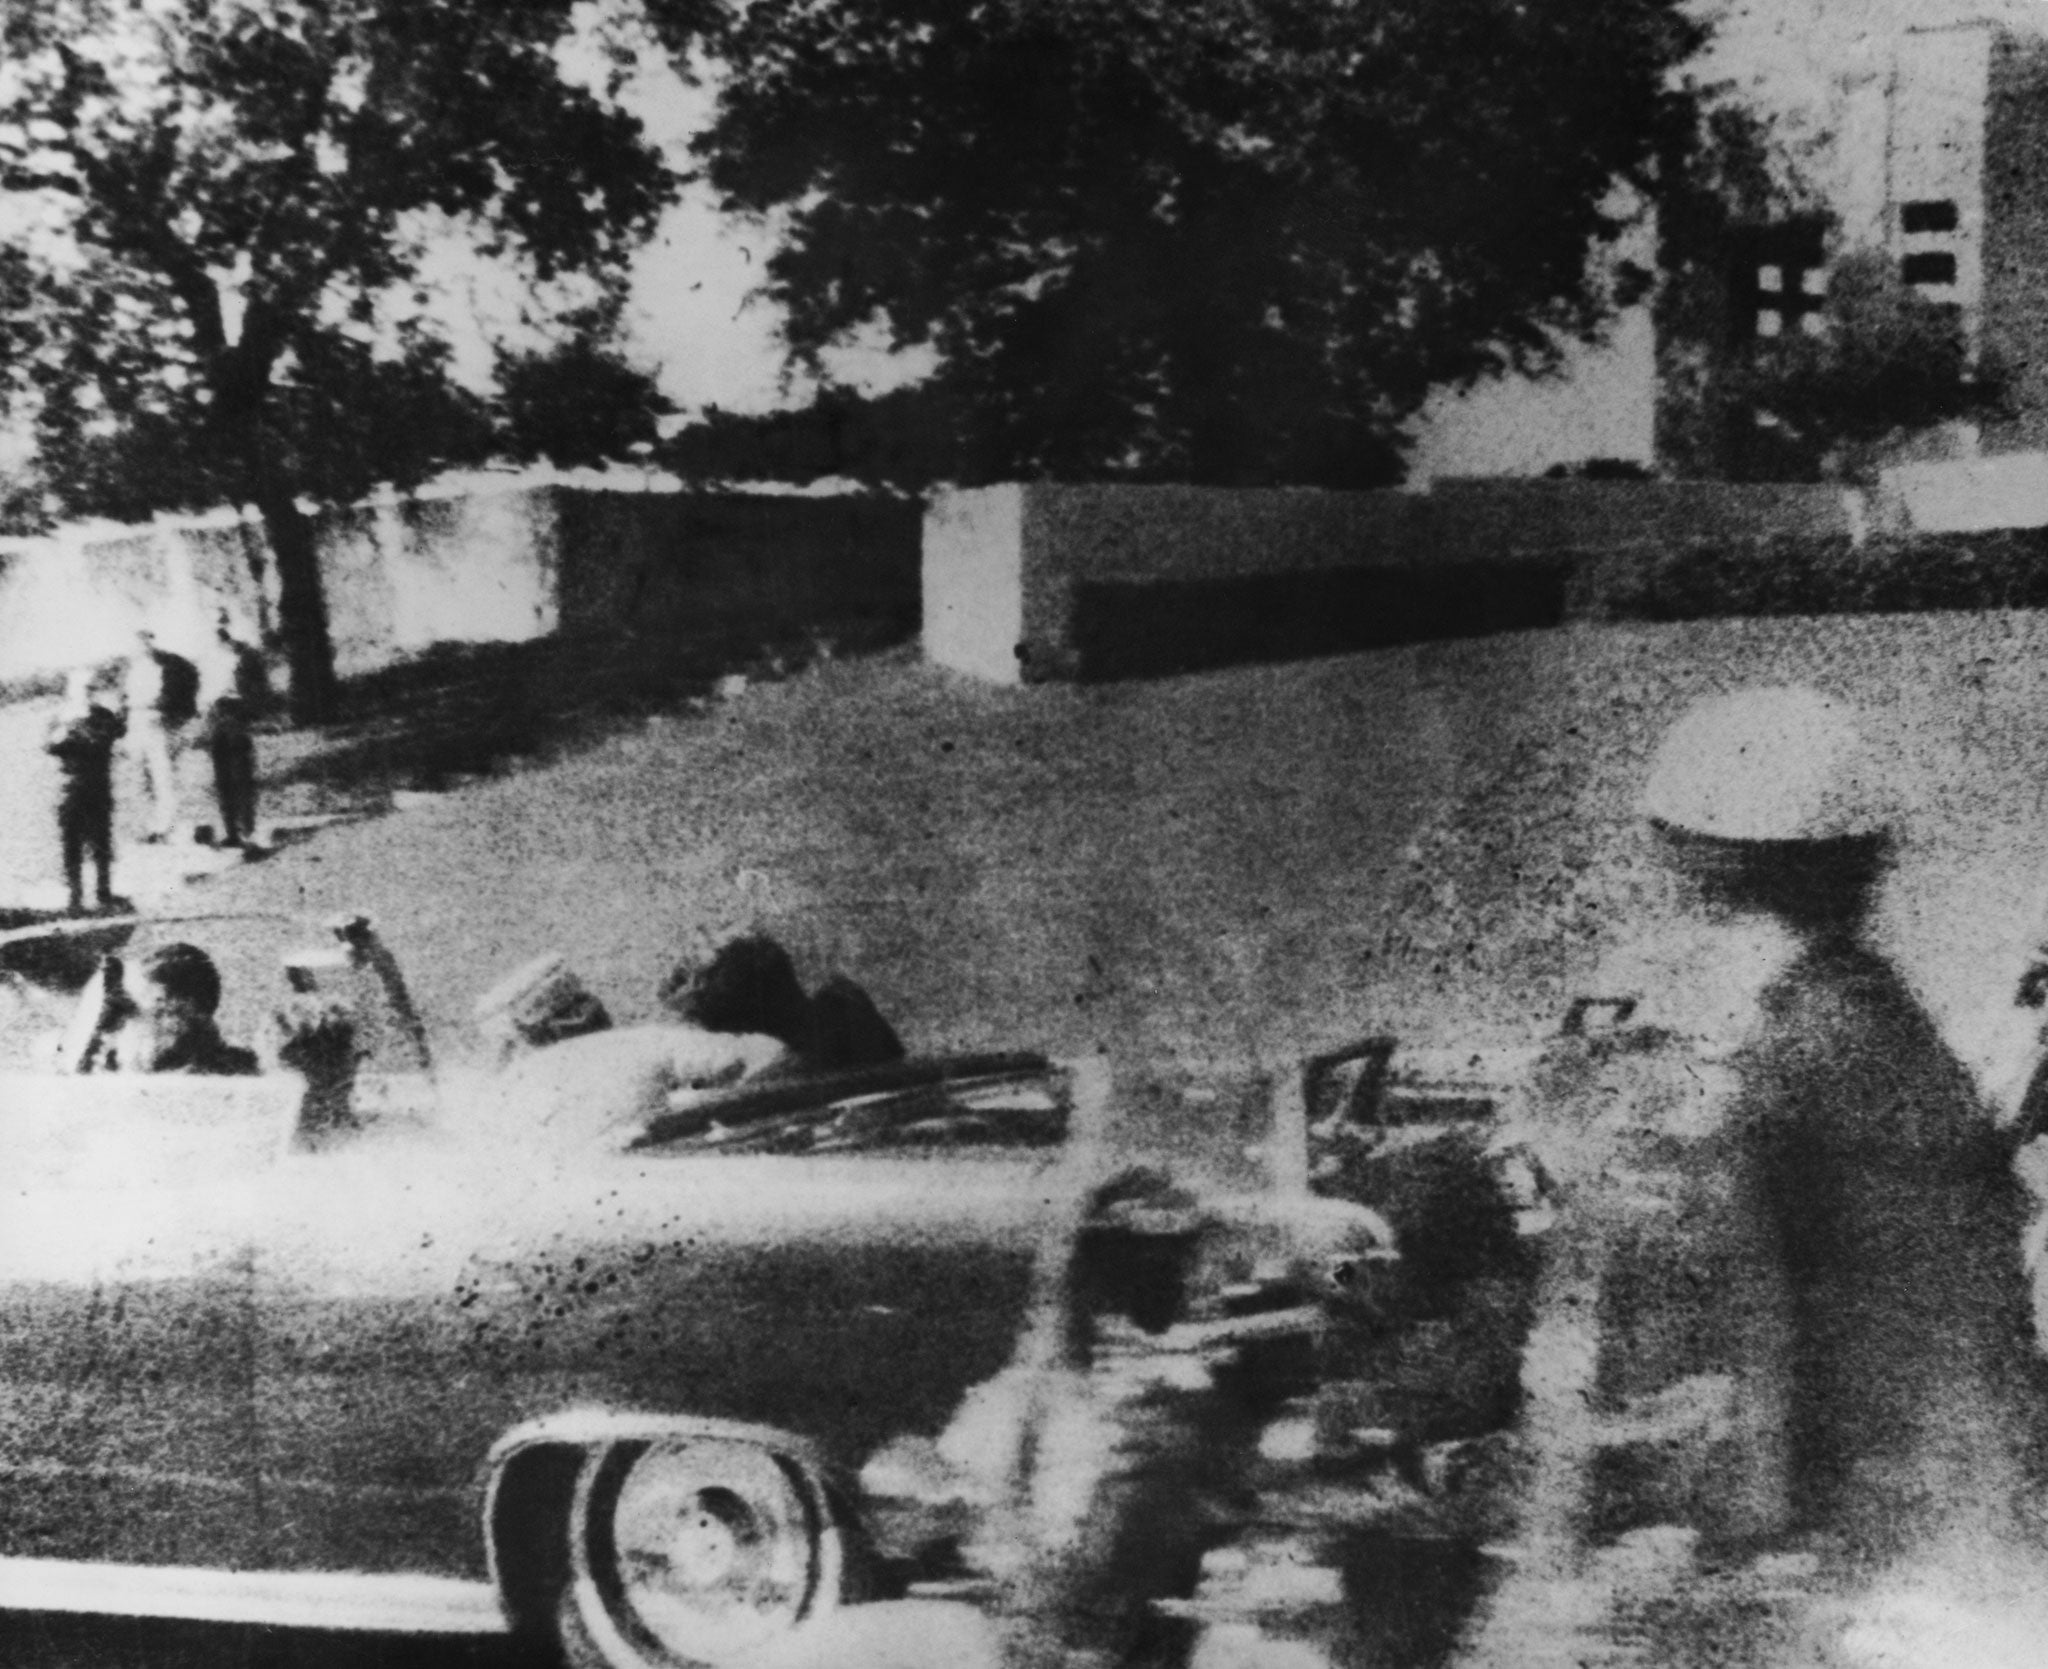 The assassination of American president John F. Kennedy in Dallas in 1963